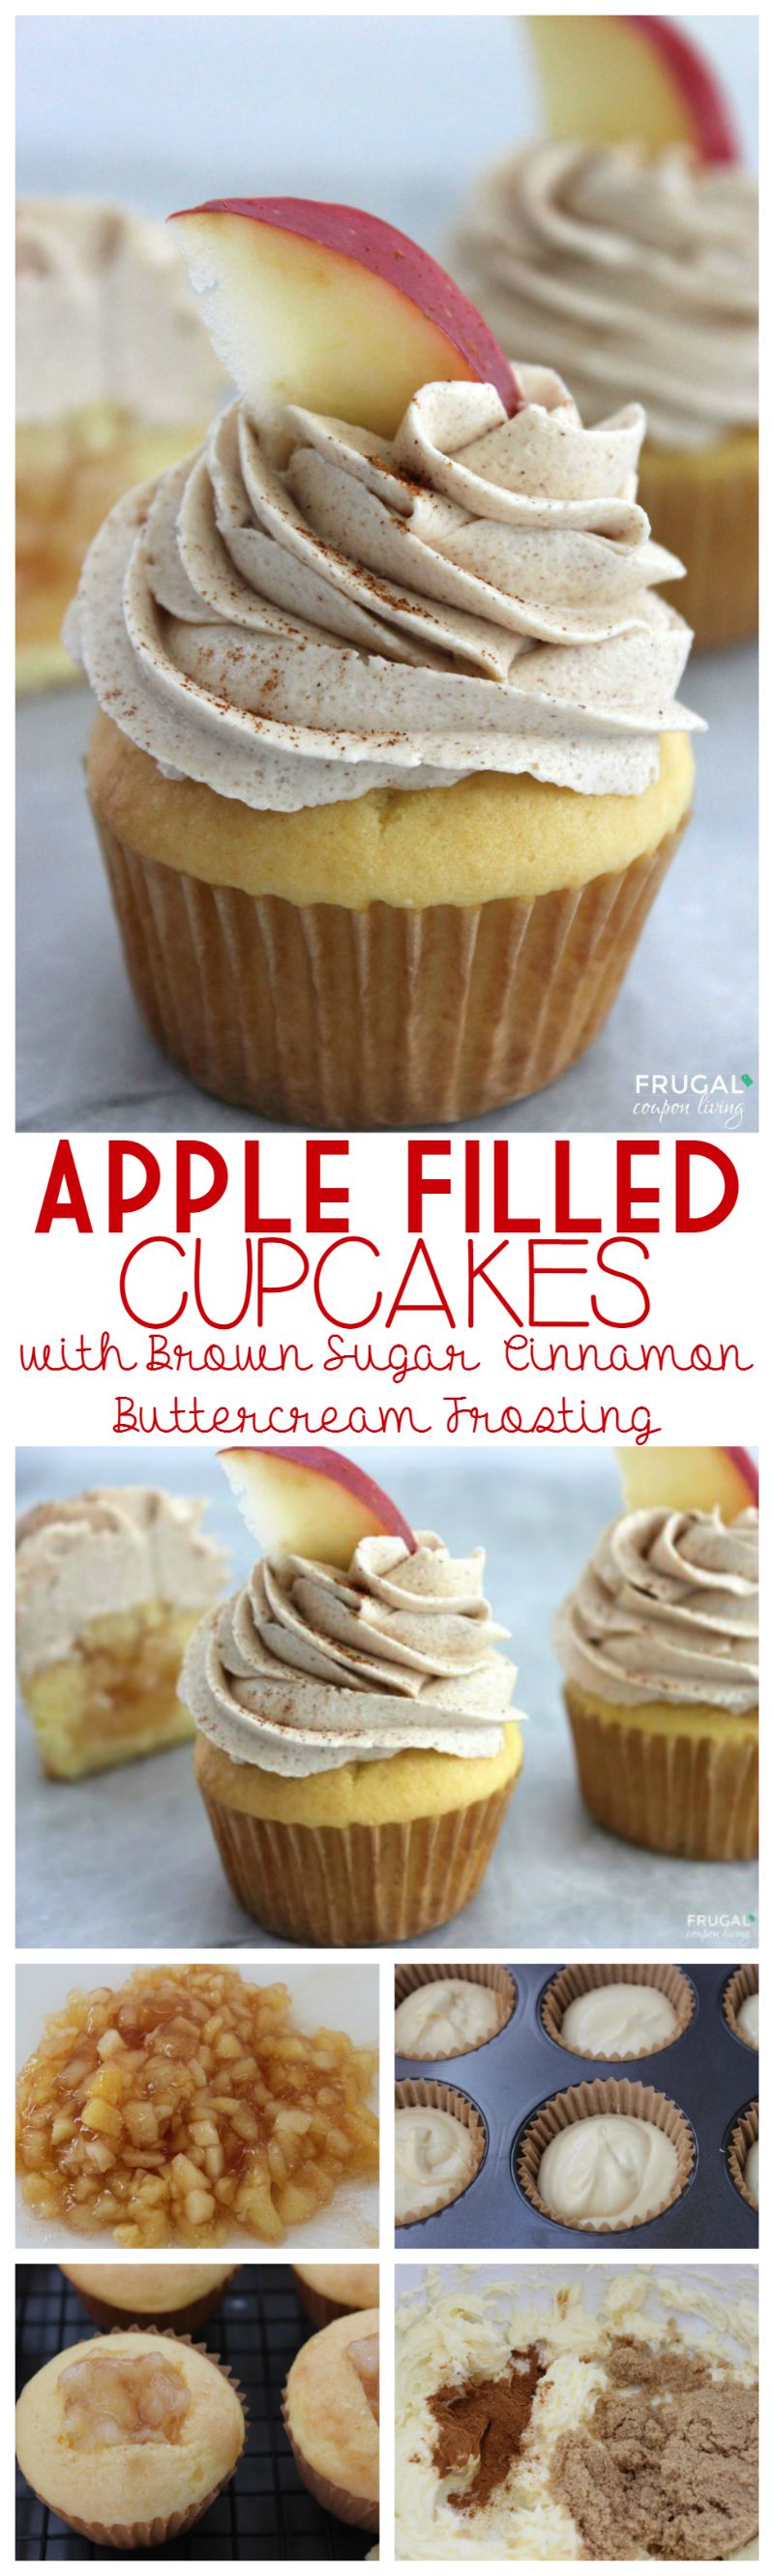 apple-filled-cupcakes-Collage-frugal-coupon-living